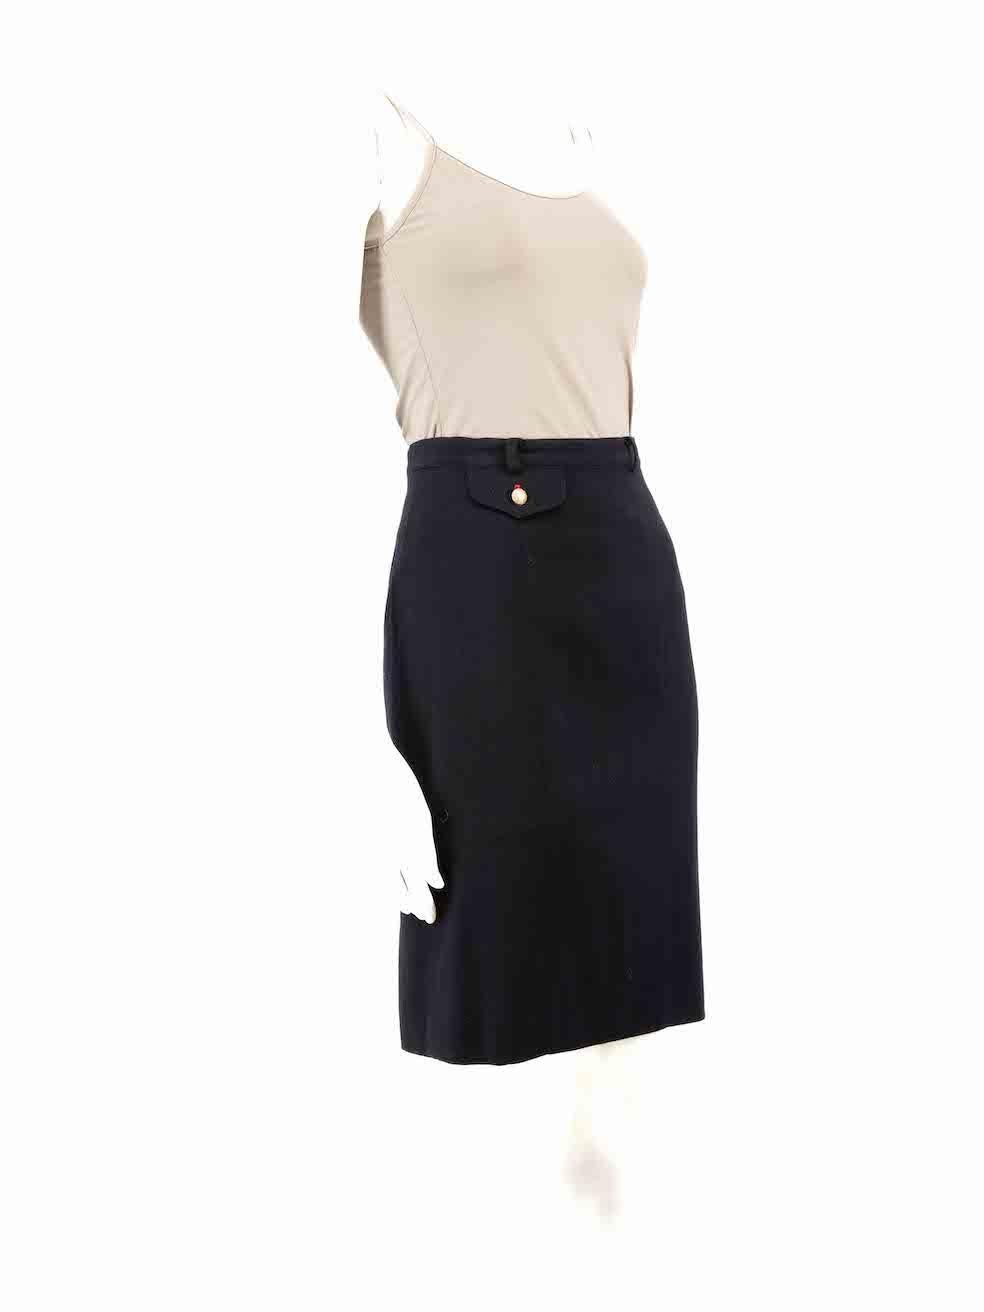 CONDITION is Very good. Hardly any visible wear to skirt is evident on this used Escada designer resale item.
 
 
 
 Details
 
 
 Navy
 
 Wool
 
 Skirt
 
 Knee length
 
 Side zip and button fastening
 
 Front pocket flap detail
 
 
 
 
 
 Made in